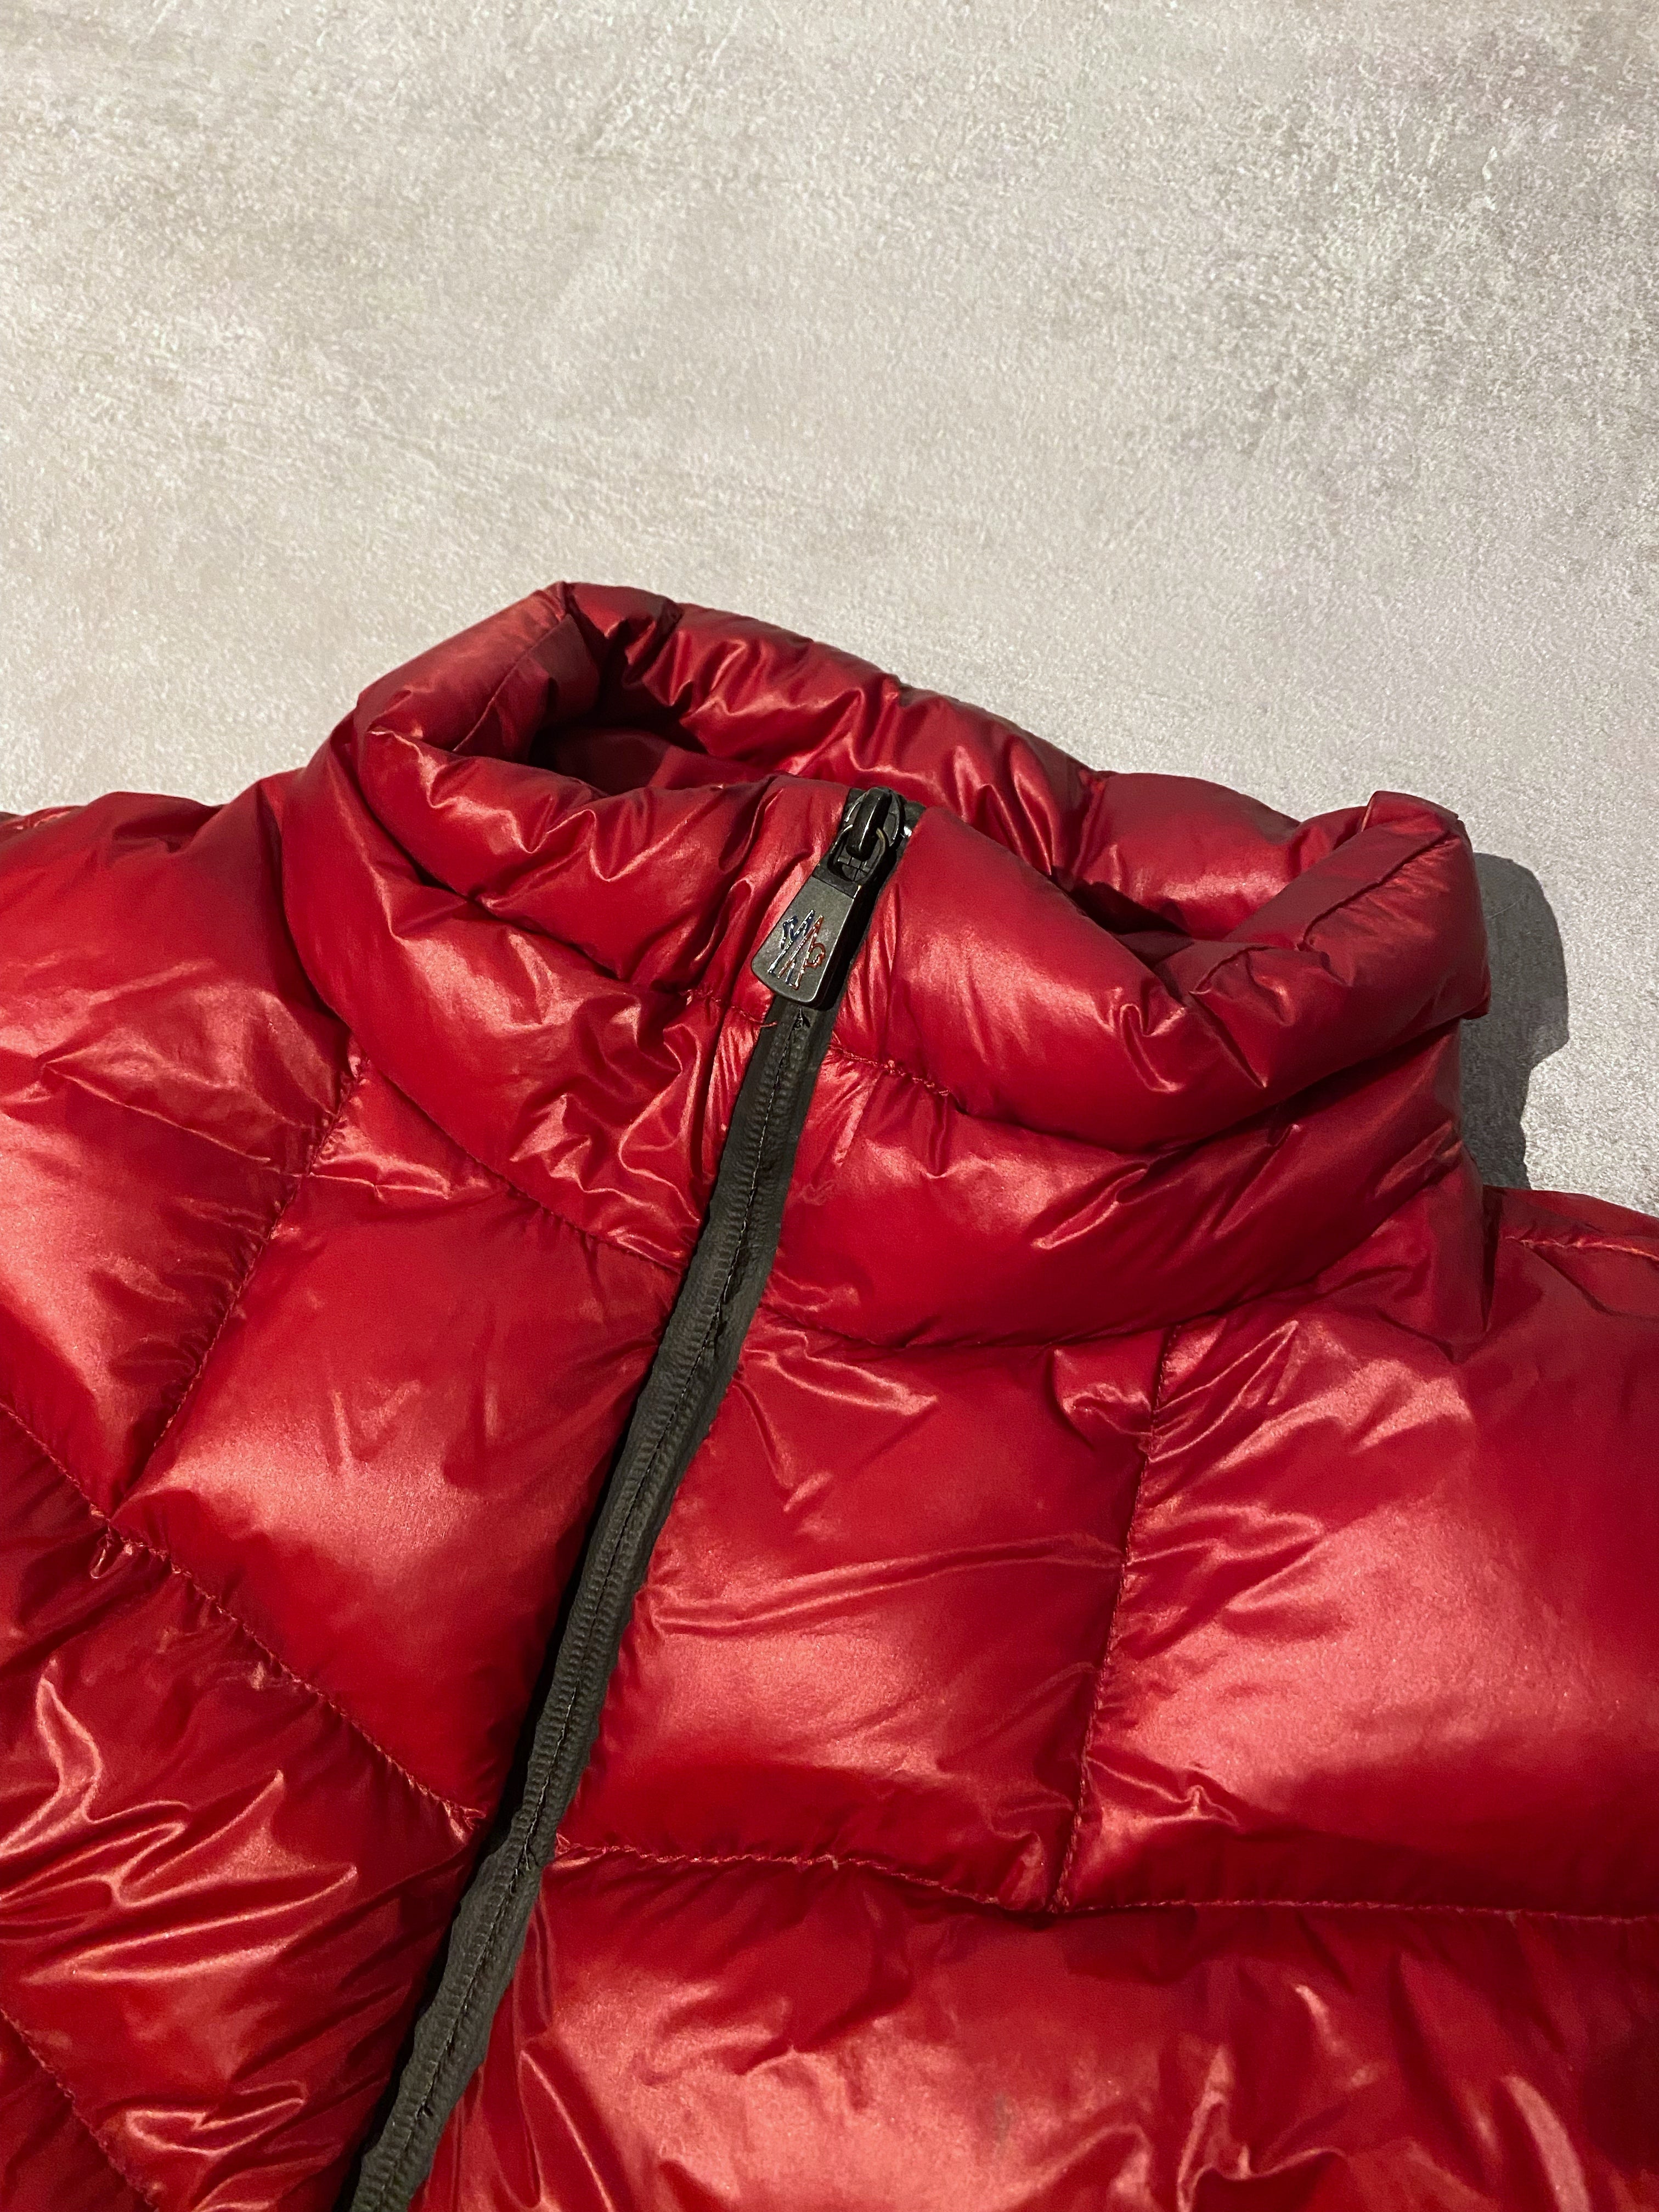 Moncler Canmore Jacket - Size 5